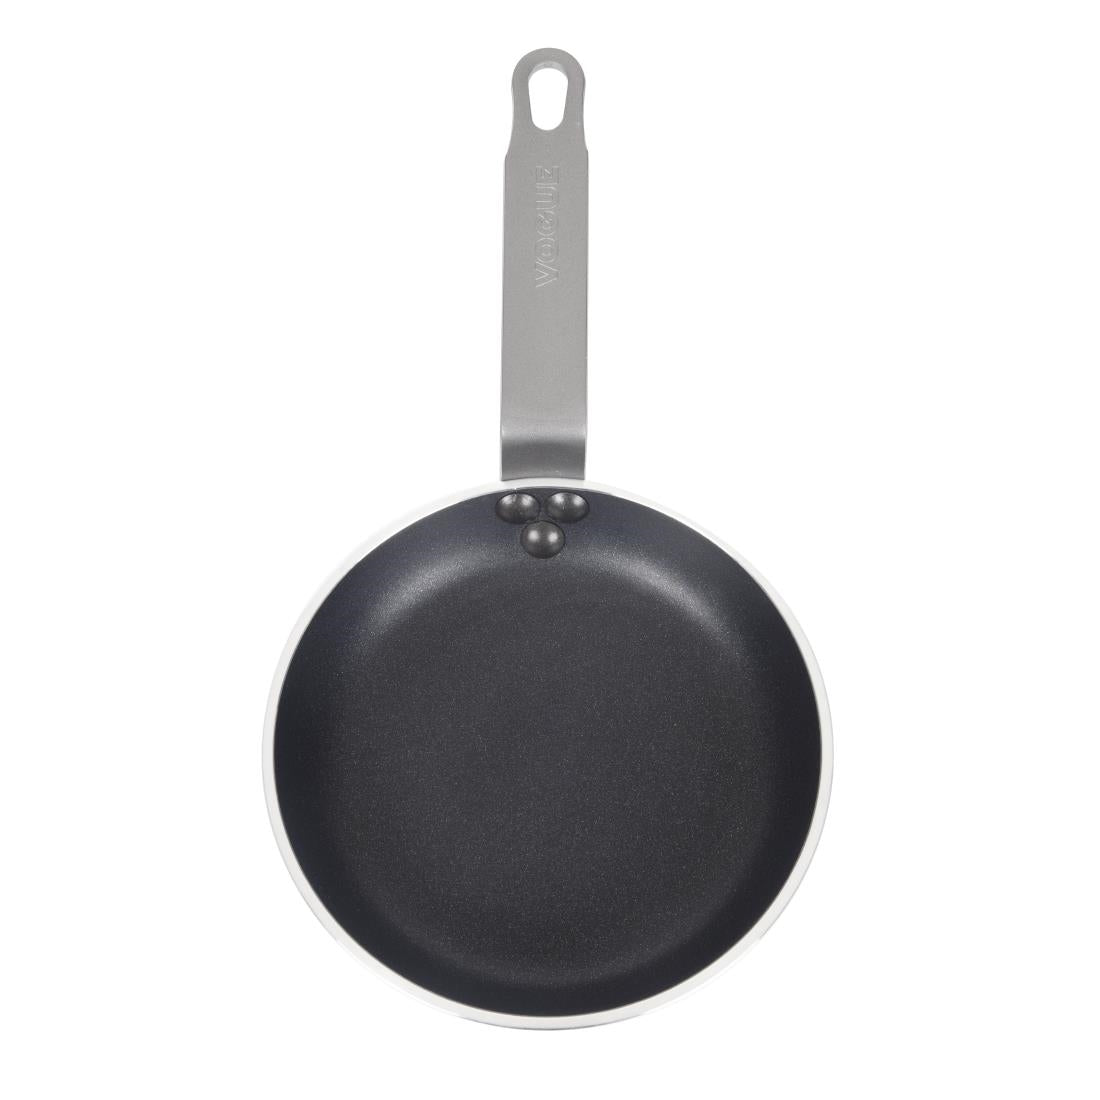 Bulk Buy Vogue Non-Stick Frypans (Pack of 6) JD Catering Equipment Solutions Ltd